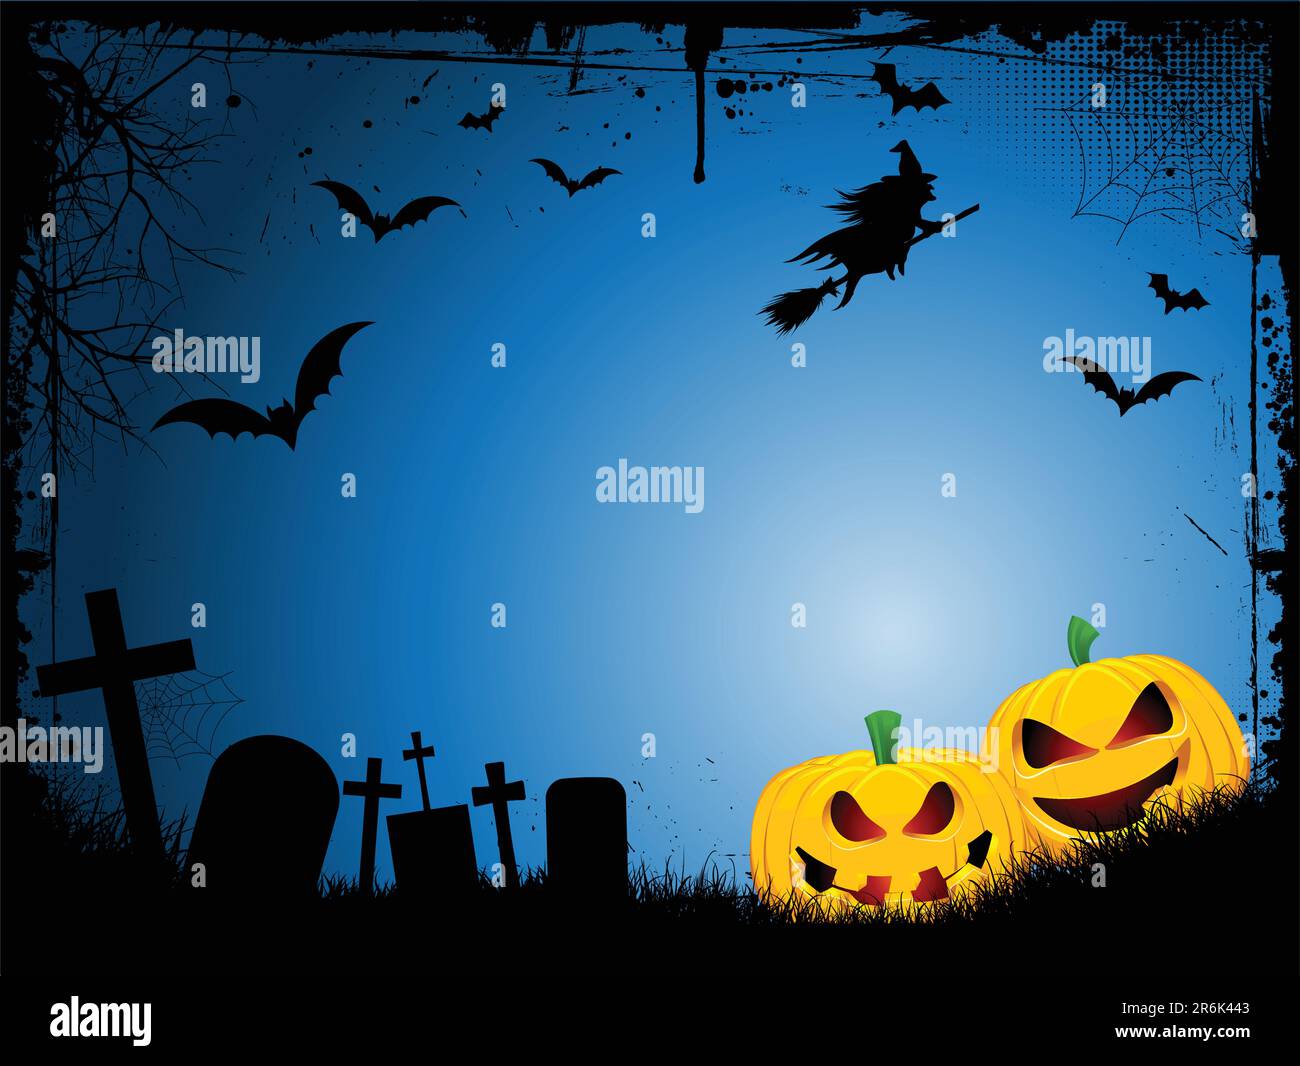 Spooky Halloween background with evil pumpkins and a witch on broomstick Stock Vector